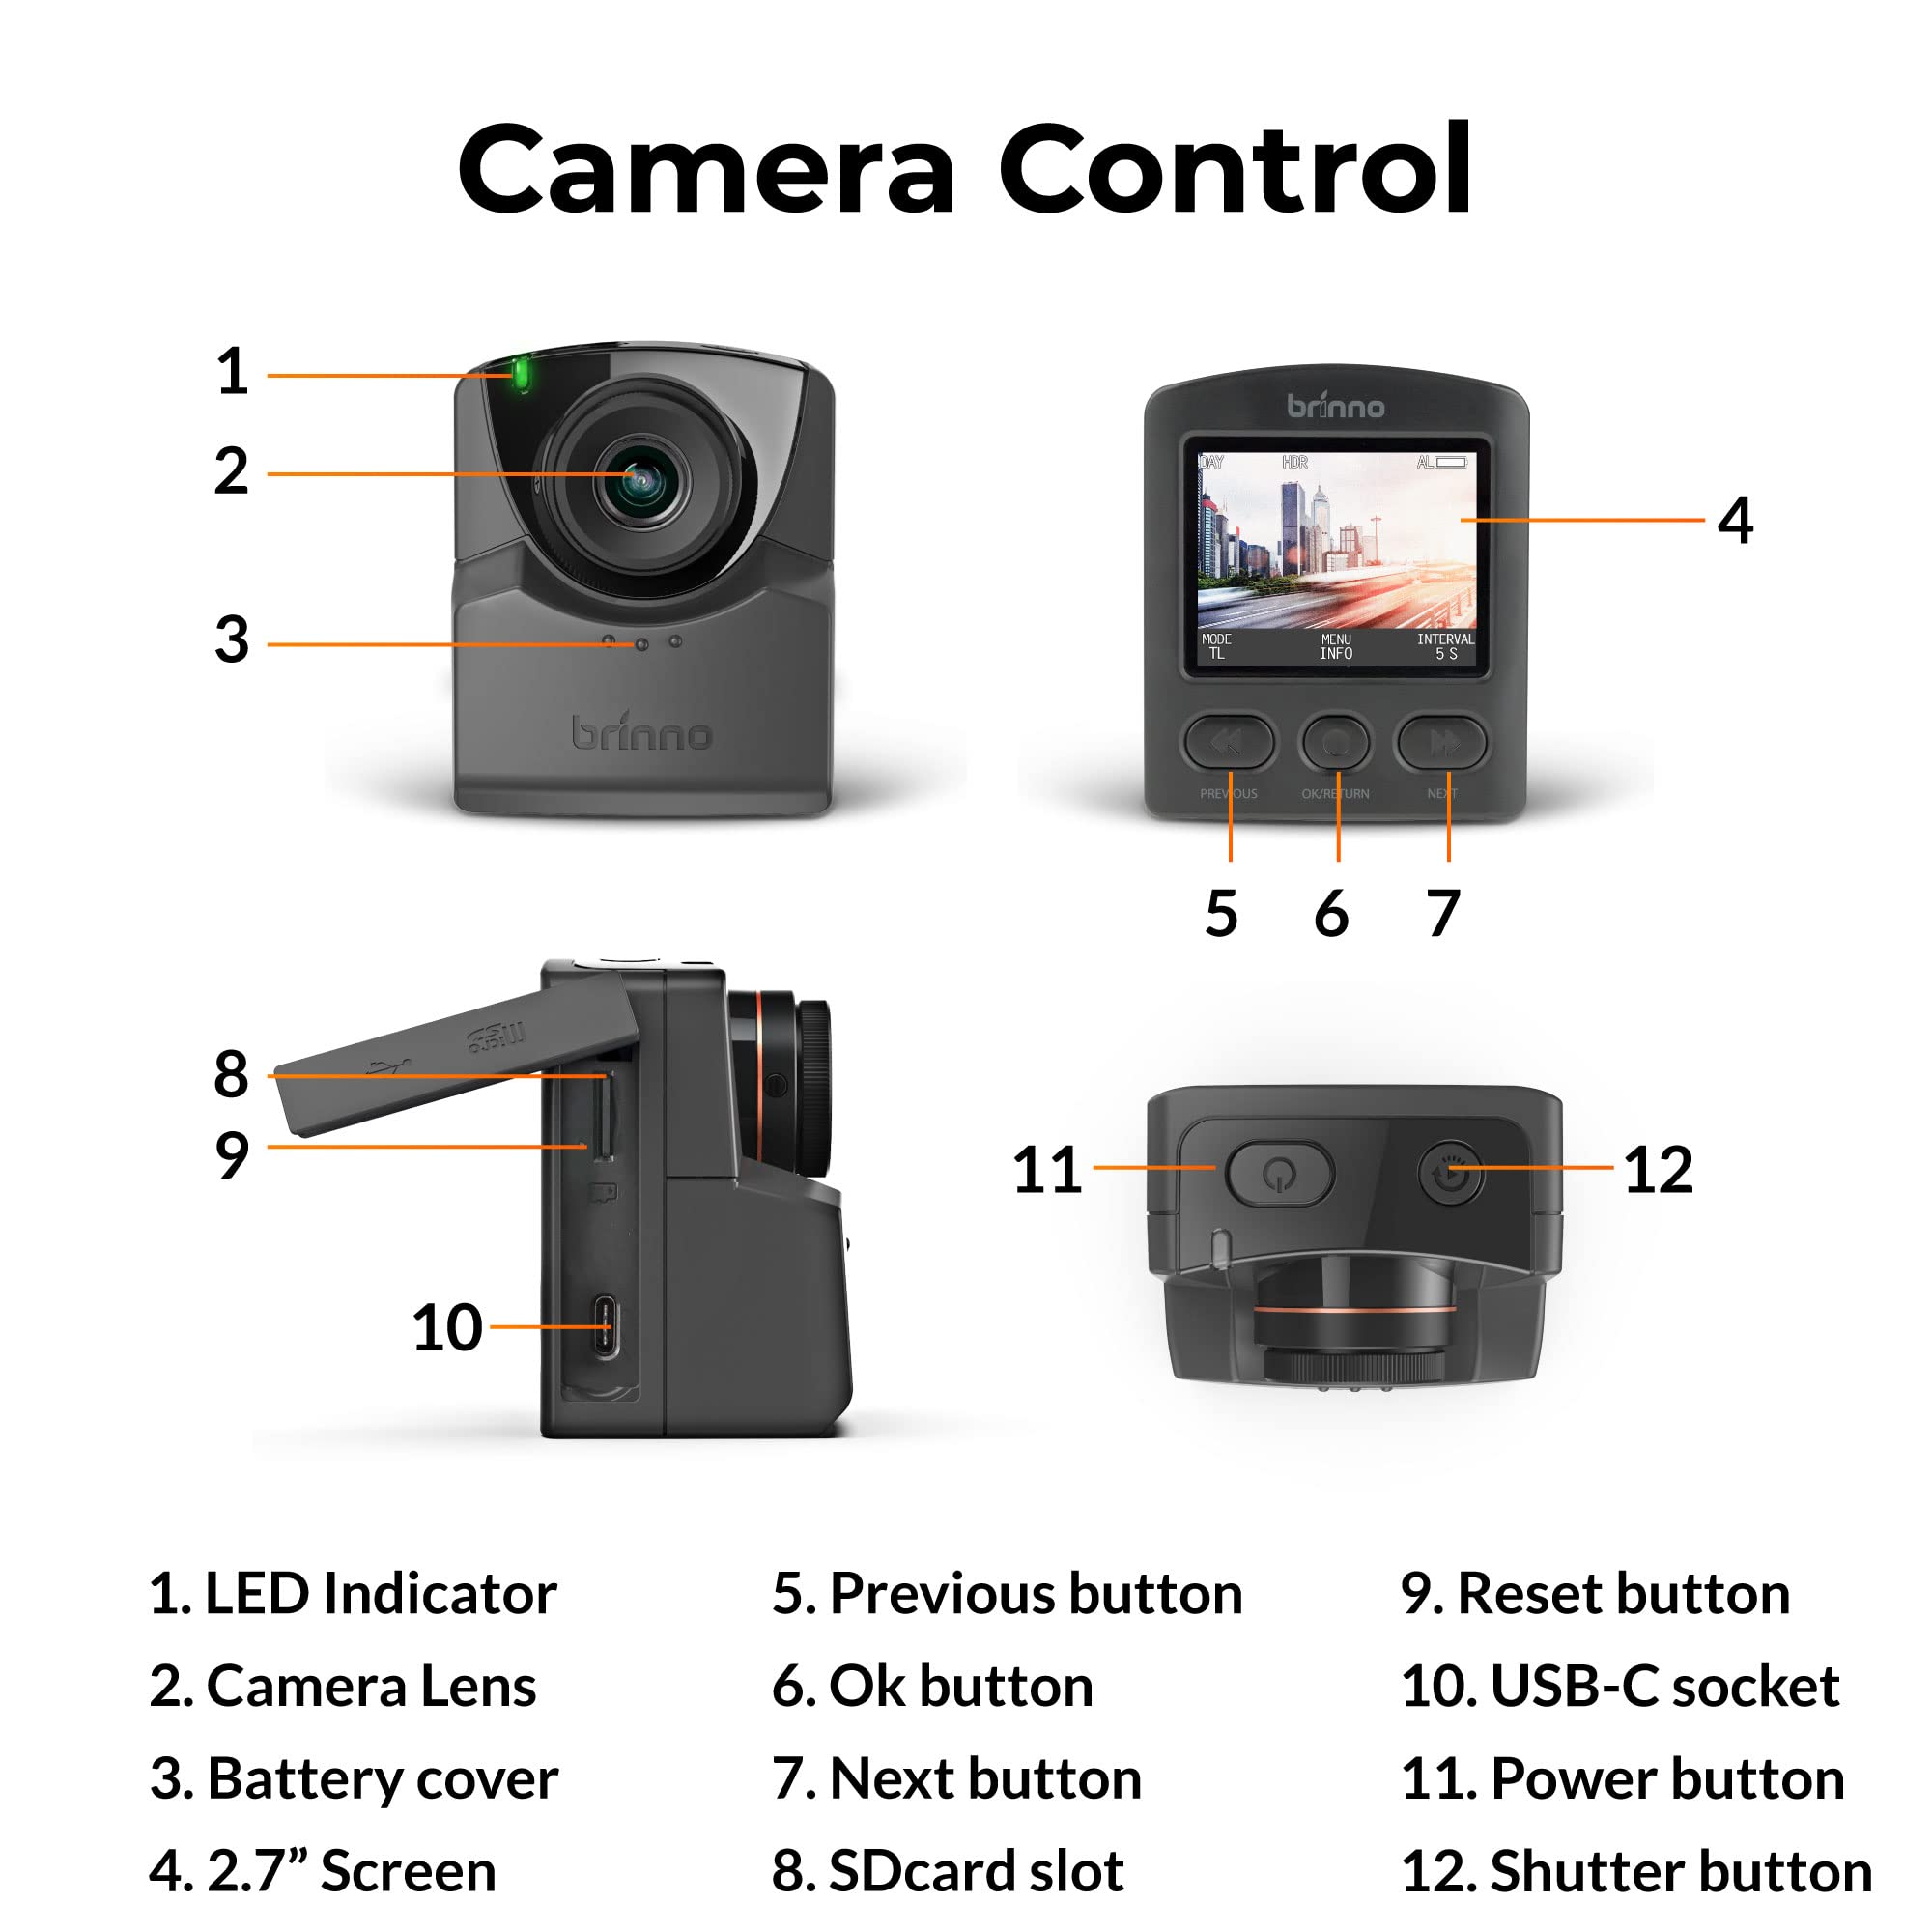 Brinno Empower TLC2020 Time Lapse Camera Outdoor Construction & ATH1000, New Quick Menu, Step Video & Stop Motion Capture Modes in HDR and FHD, Long-Lasting Battery, Weatherproof